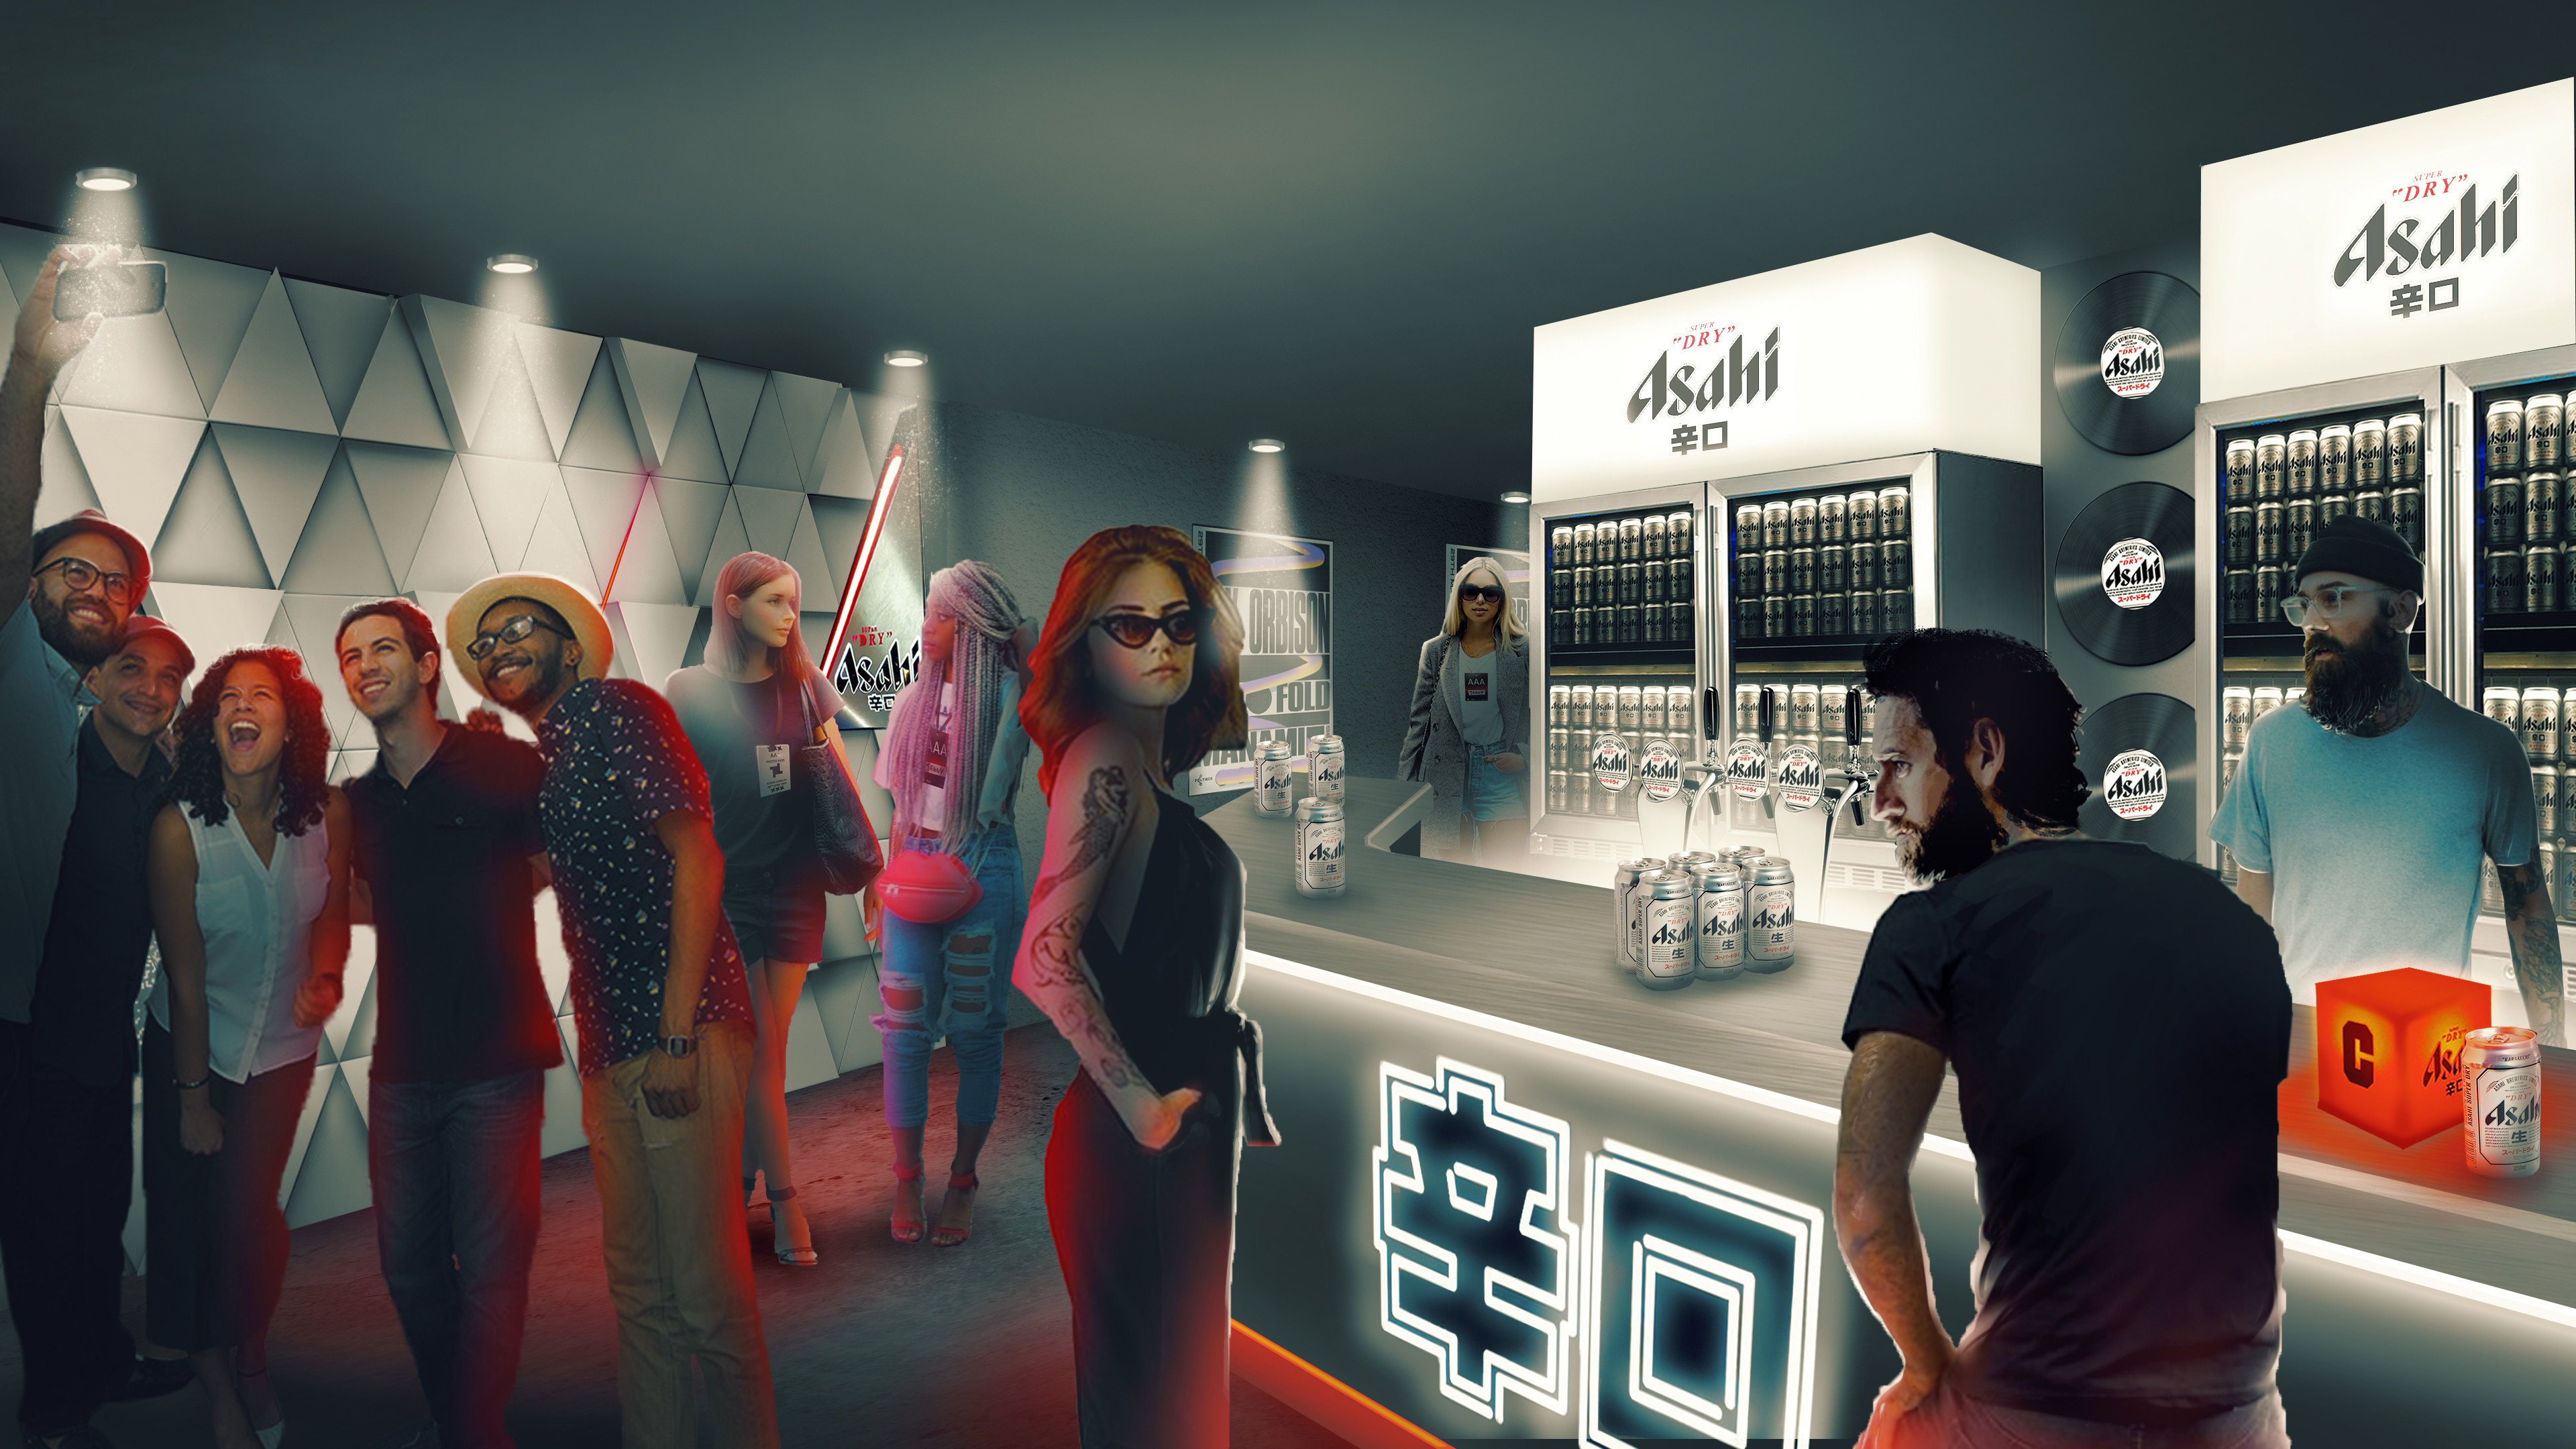 underground bar, I created visual to show how a bar in club could be turned into the brand guideline of Asahi. 
This was mostly done trough light installation and specific asset created for the project.